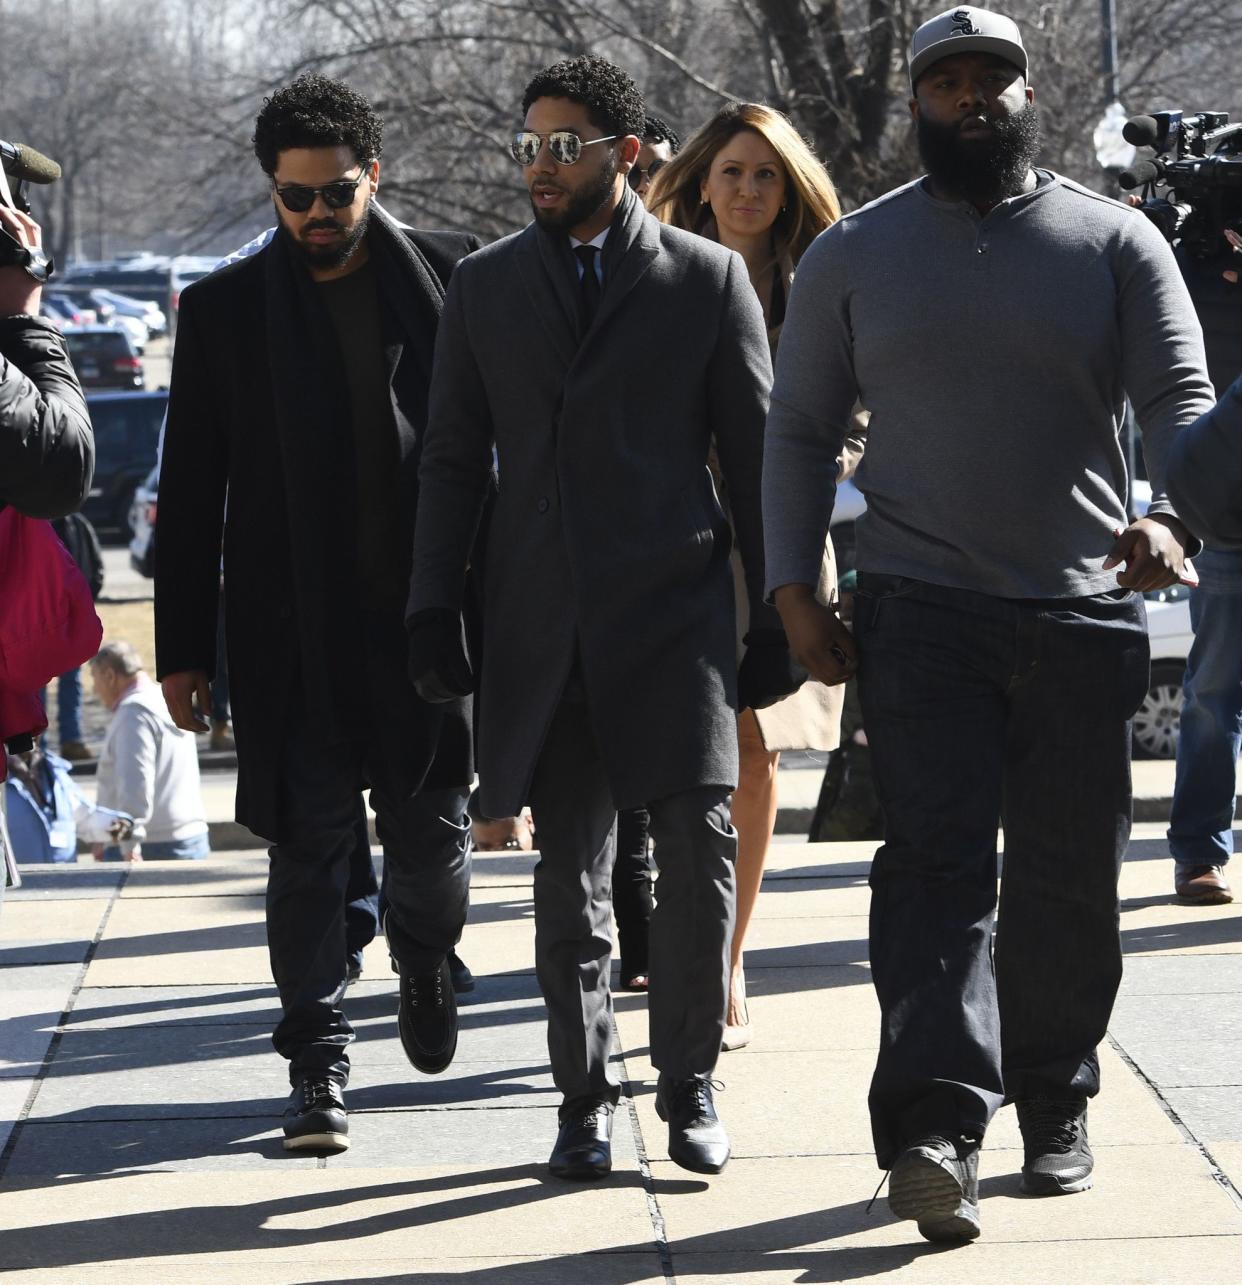 "Empire" actor Jussie Smollett, center, arrives at Leighton Criminal Court Building for a hearing to discuss whether cameras will be allowed in the courtroom during his disorderly conduct case on Tuesday, Mar. 12, 2019, in Chicago.